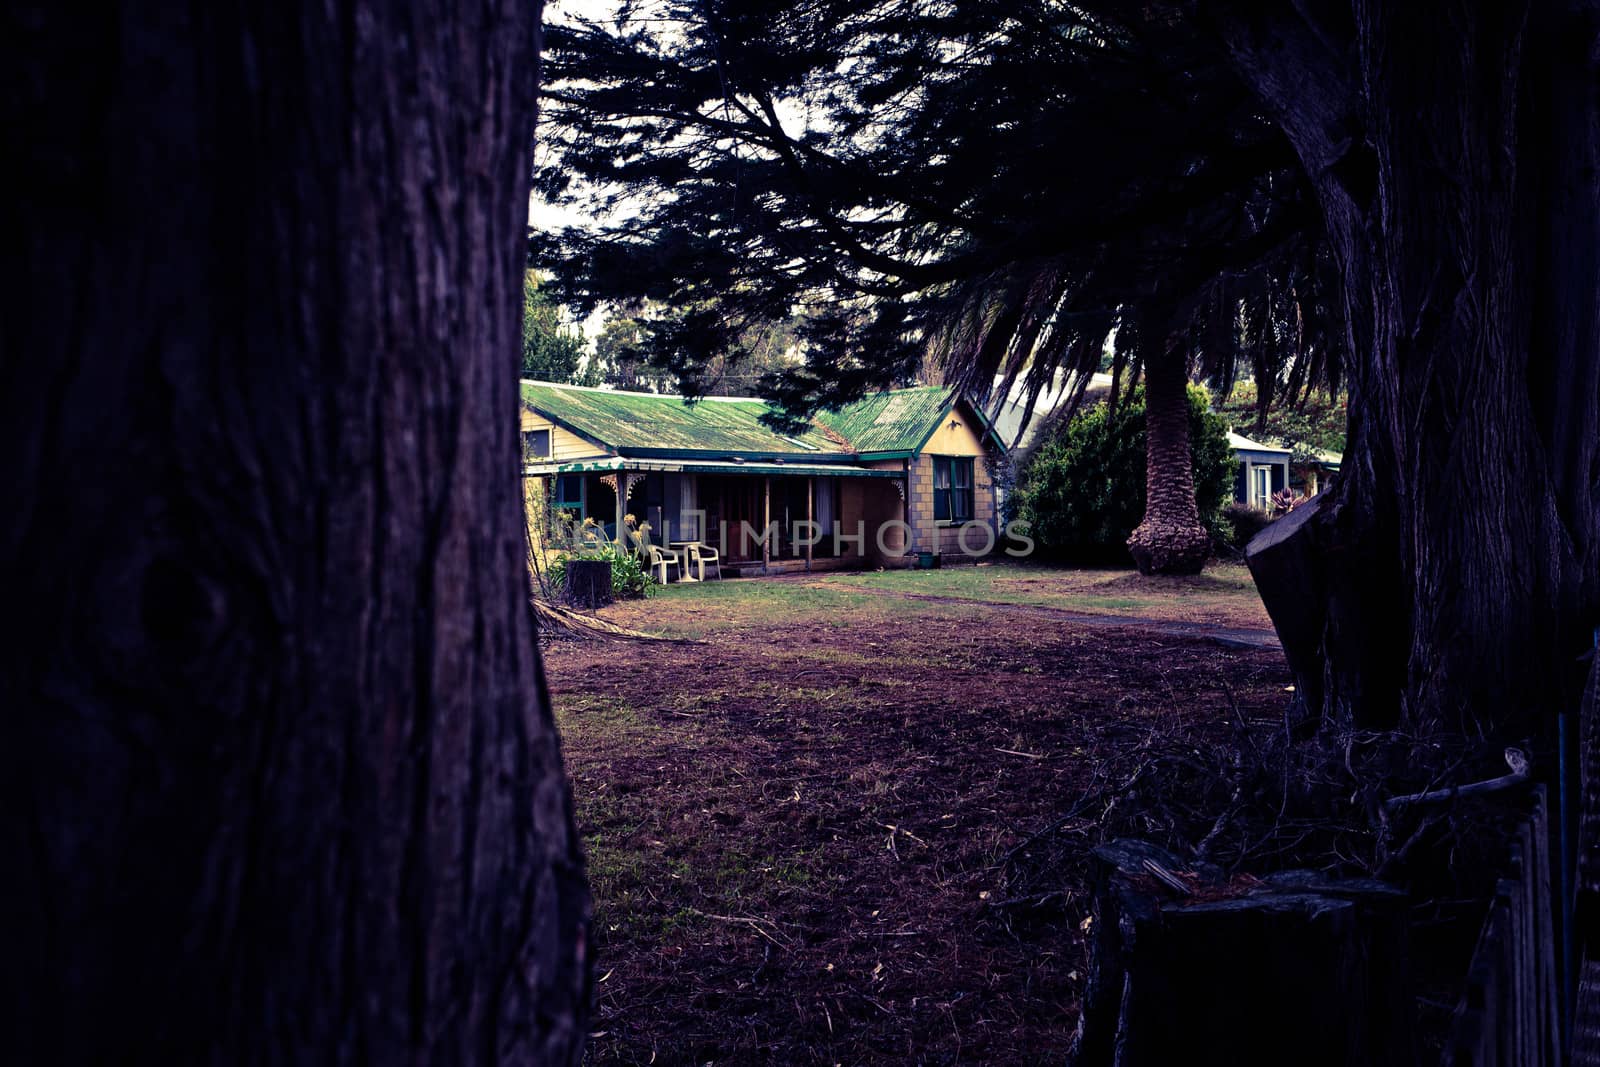 Rambling rural farmhouse with an open front verandah and corrugated iron roof viewed from between the trunks of two big trees